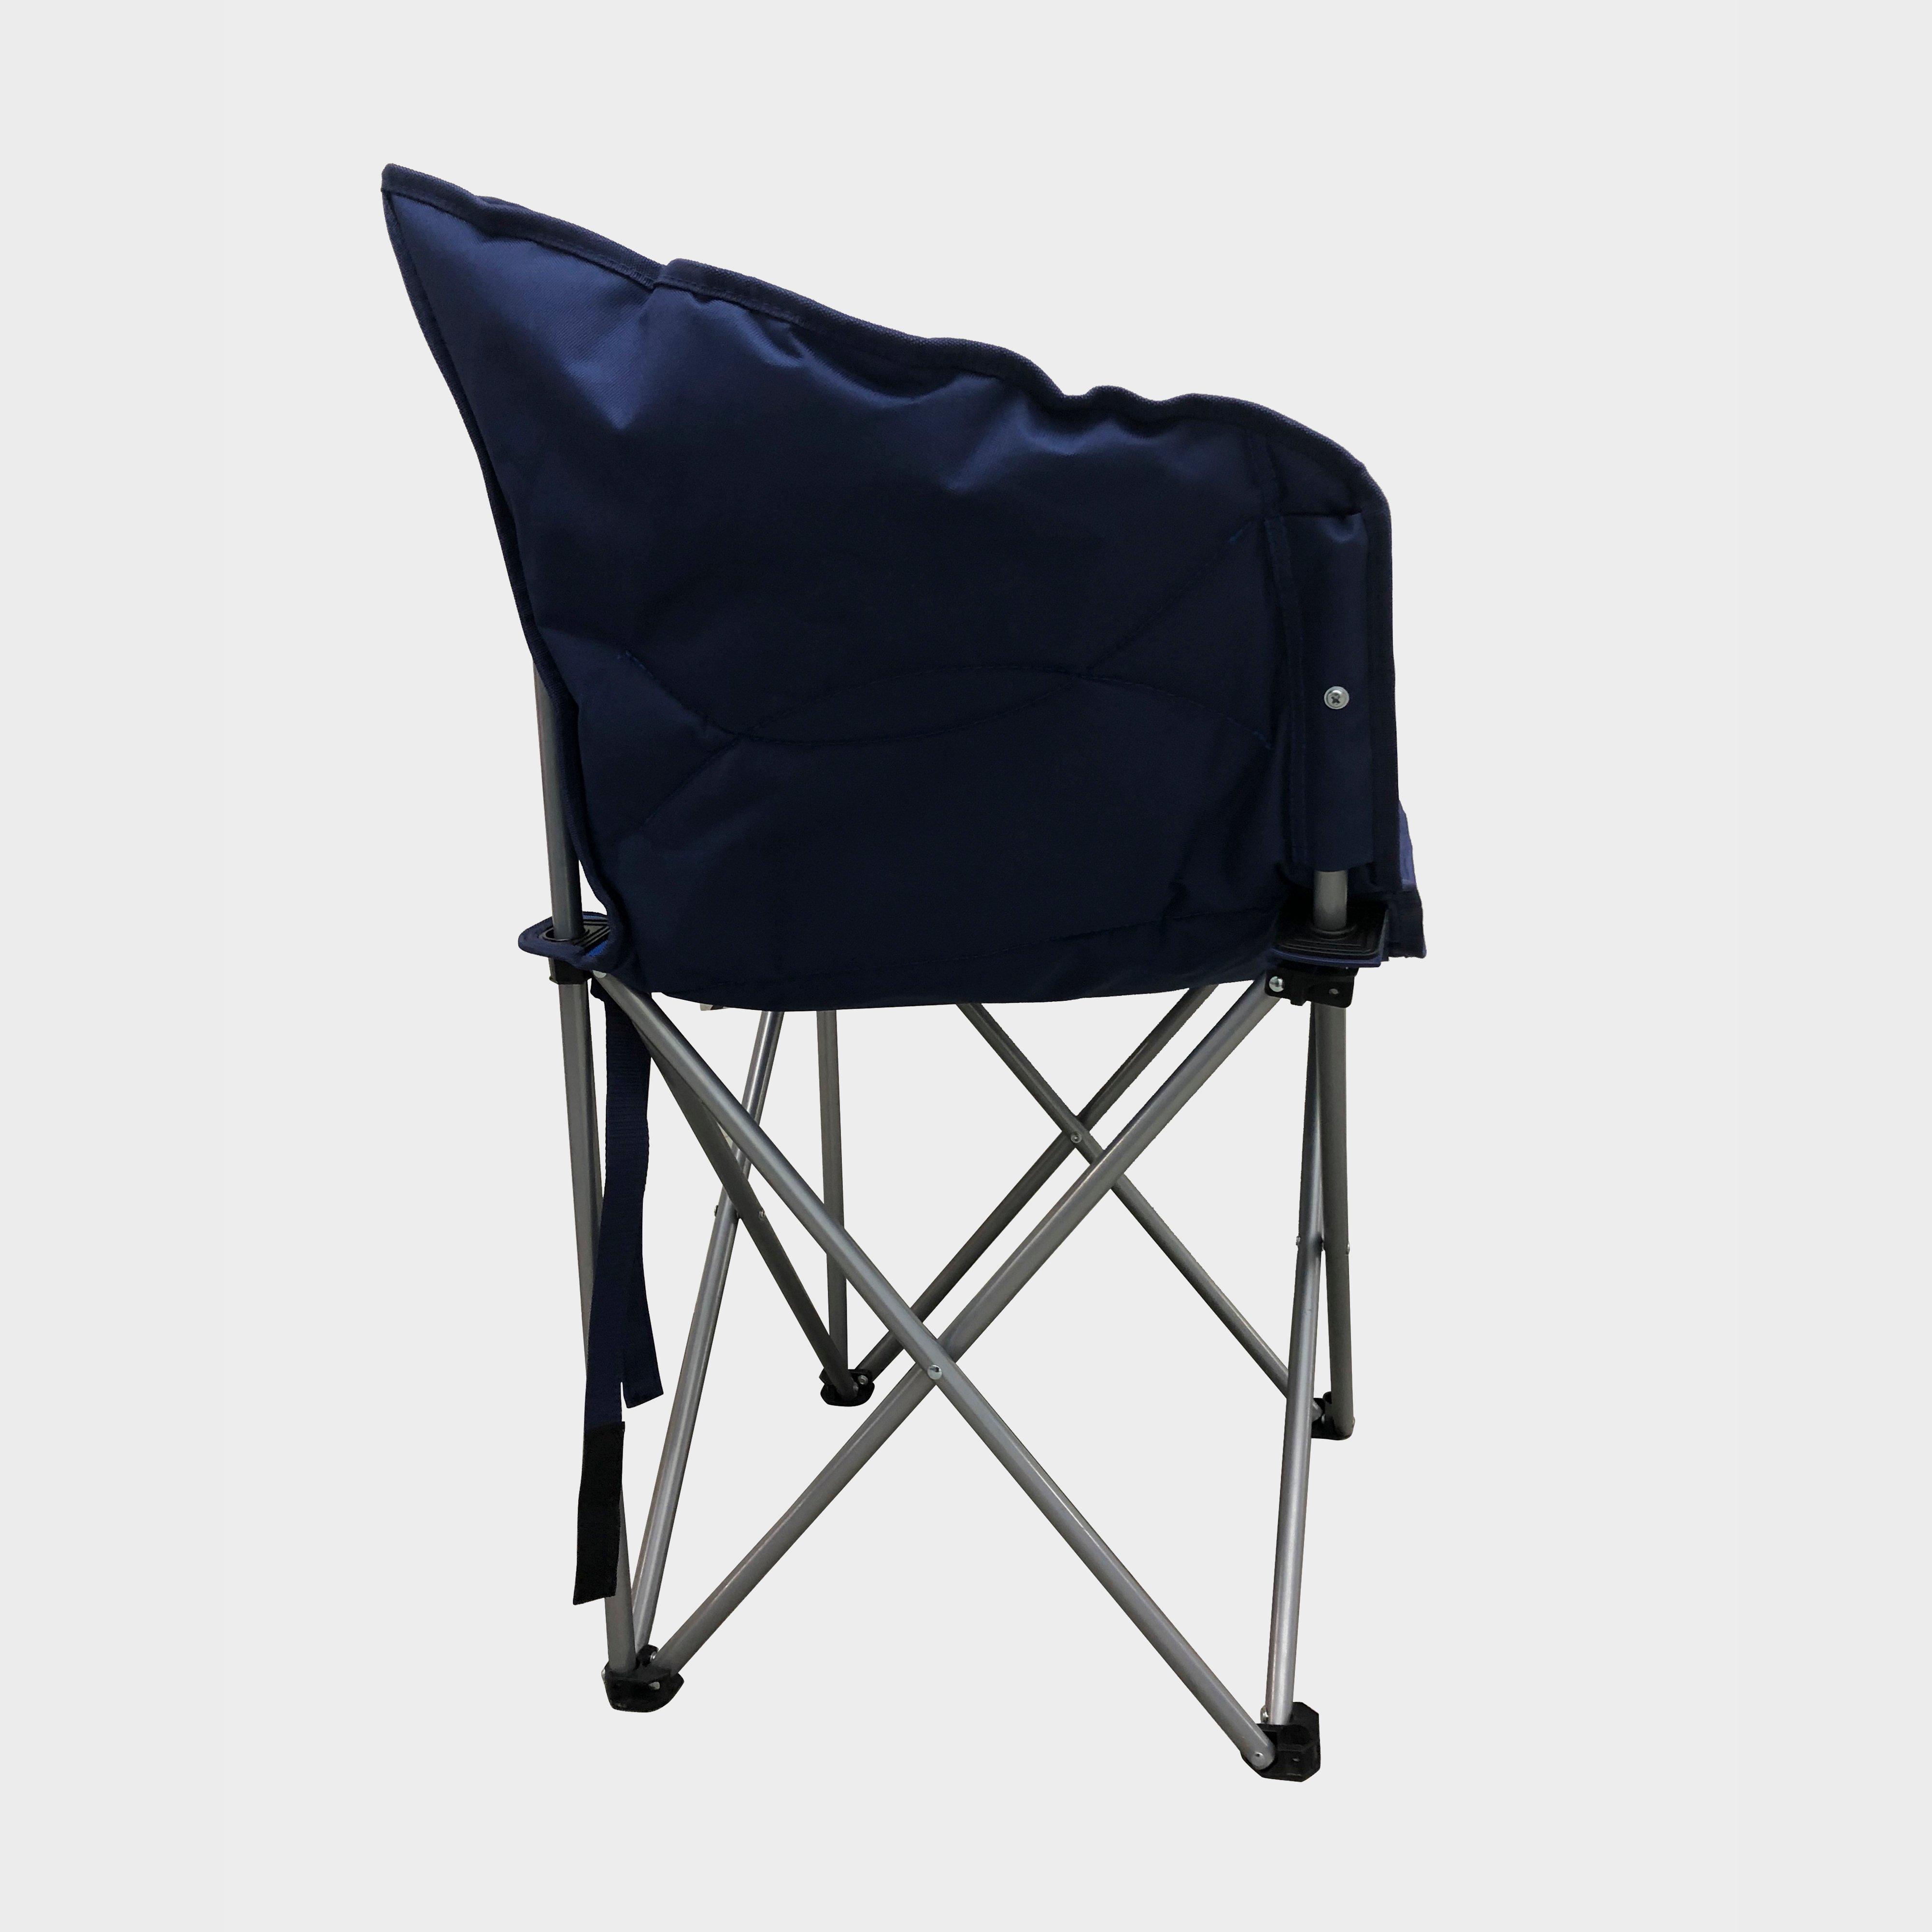 Eurohike Quilted Tub Camping Chair